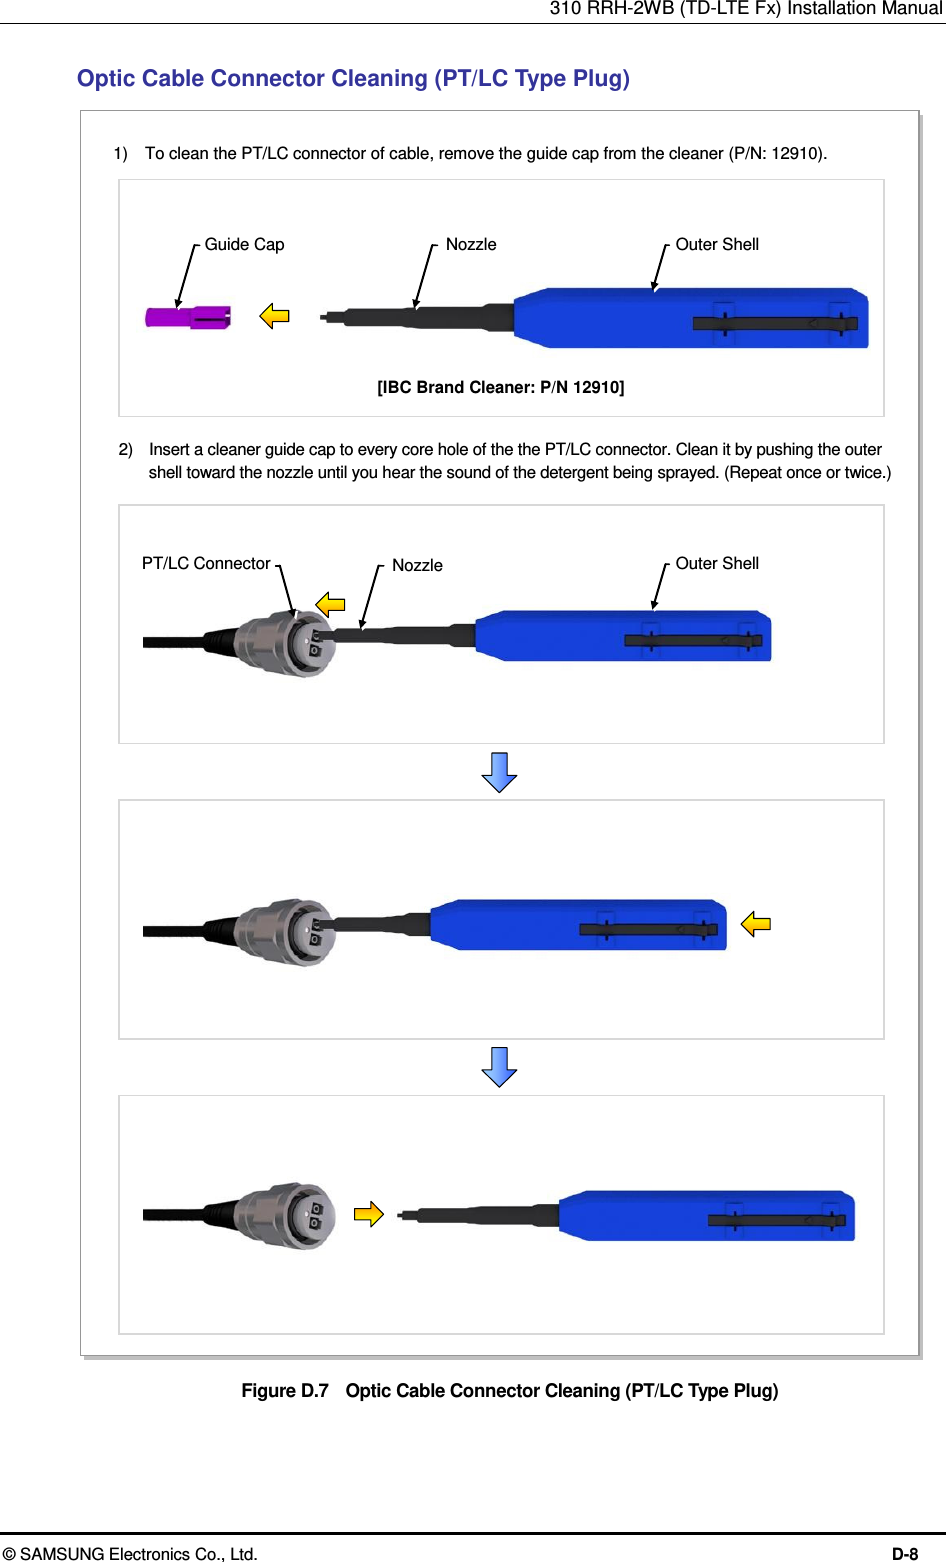 310 RRH-2WB (TD-LTE Fx) Installation Manual  © SAMSUNG Electronics Co., Ltd.  D-8 Optic Cable Connector Cleaning (PT/LC Type Plug) Figure D.7    Optic Cable Connector Cleaning (PT/LC Type Plug)  Guide Cap 1)    To clean the PT/LC connector of cable, remove the guide cap from the cleaner (P/N: 12910).  2)    Insert a cleaner guide cap to every core hole of the the PT/LC connector. Clean it by pushing the outer shell toward the nozzle until you hear the sound of the detergent being sprayed. (Repeat once or twice.) Outer Shell Nozzle Outer Shell Nozzle PT/LC Connector [IBC Brand Cleaner: P/N 12910] 